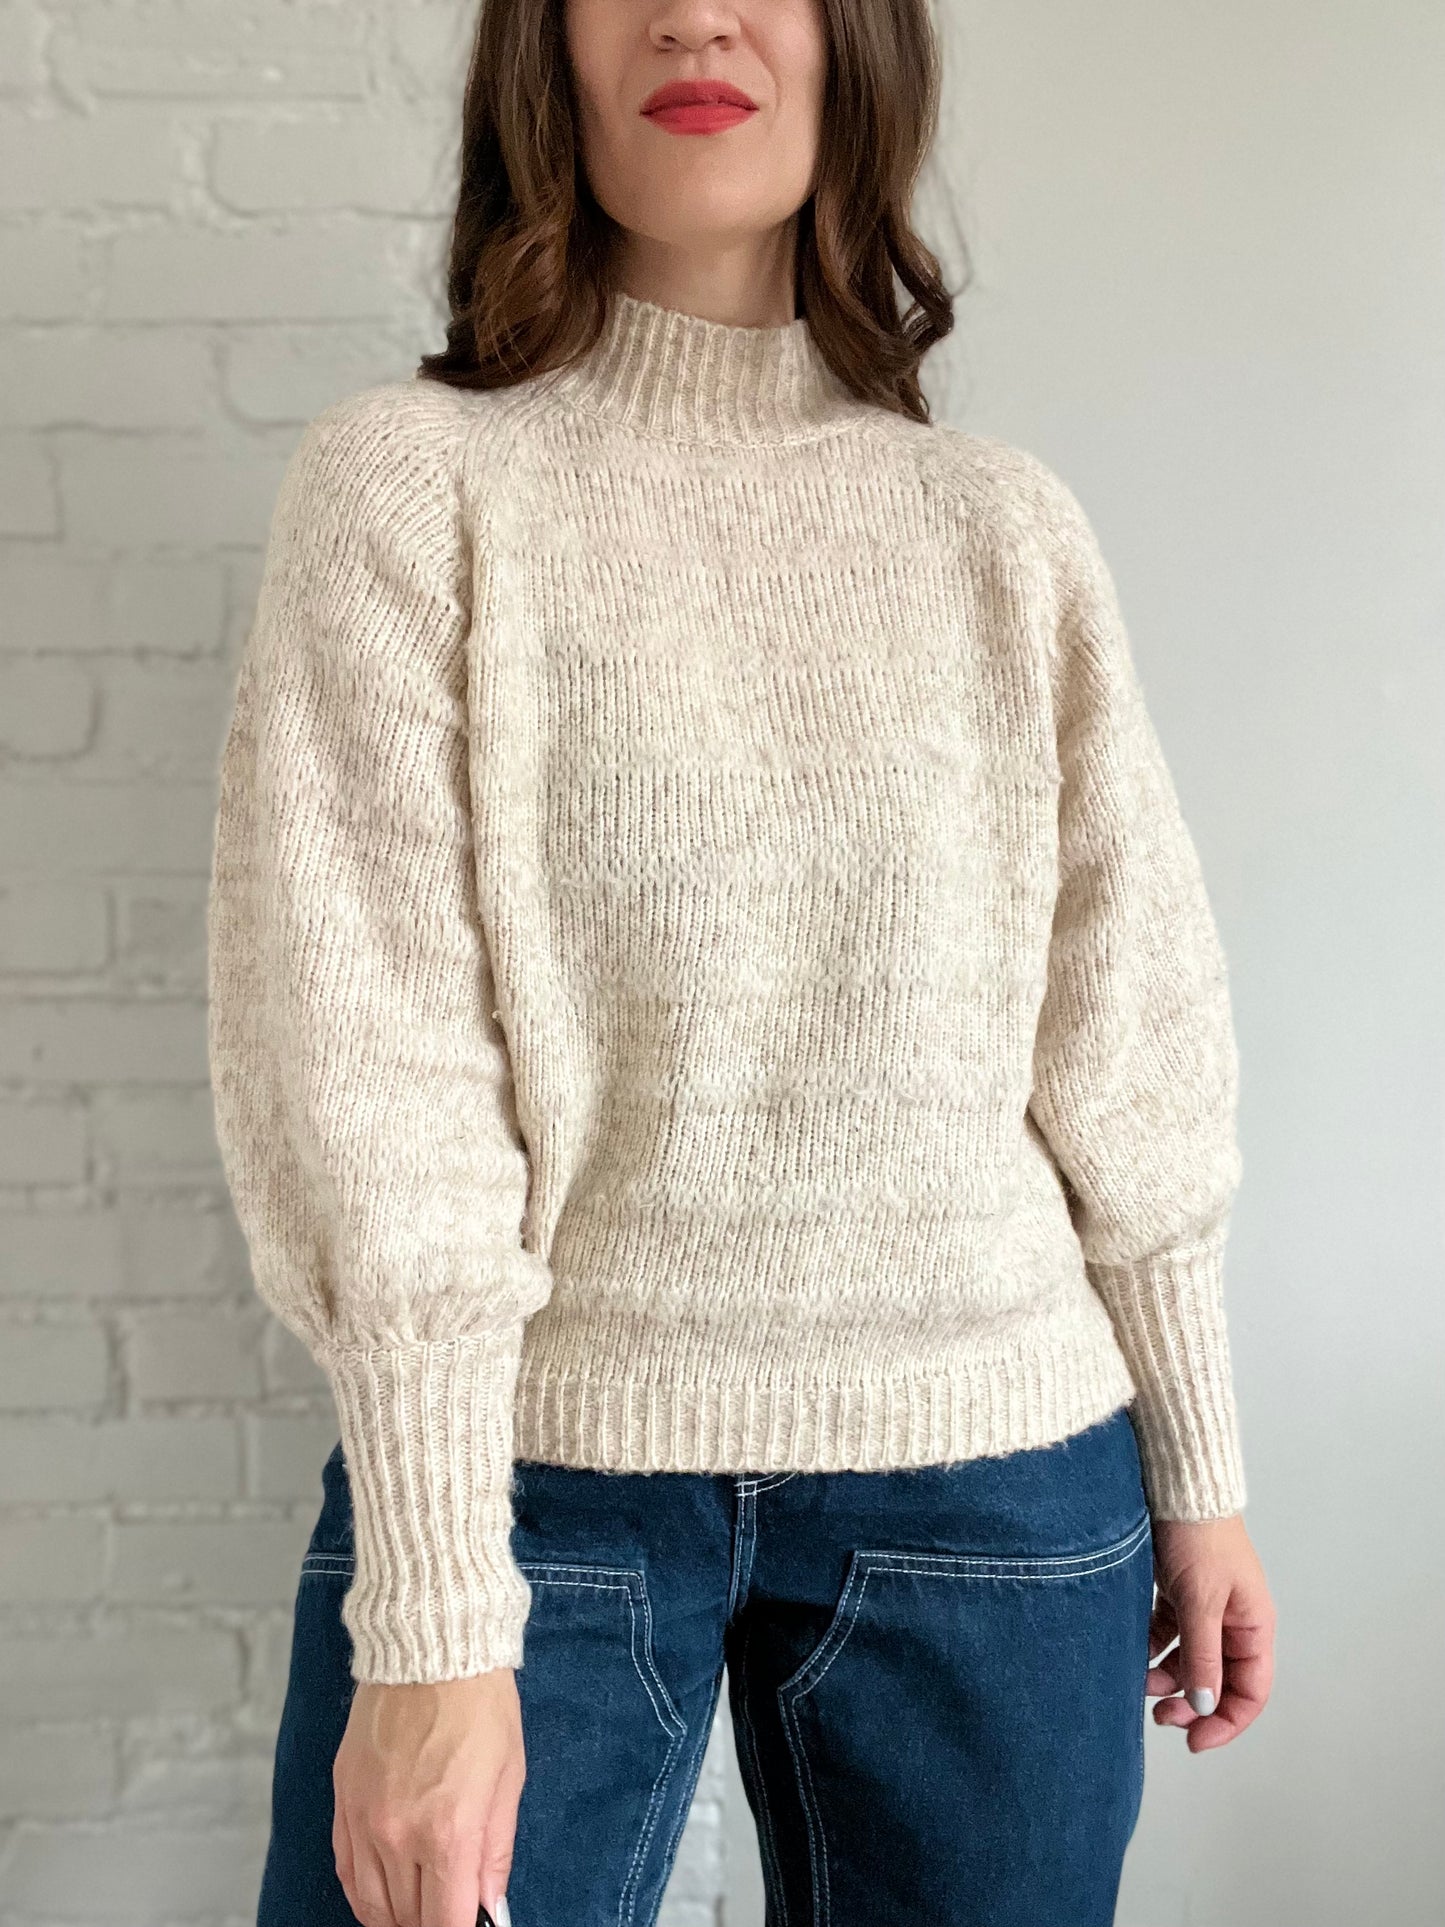 High Neck Knitted Pullover - Size S